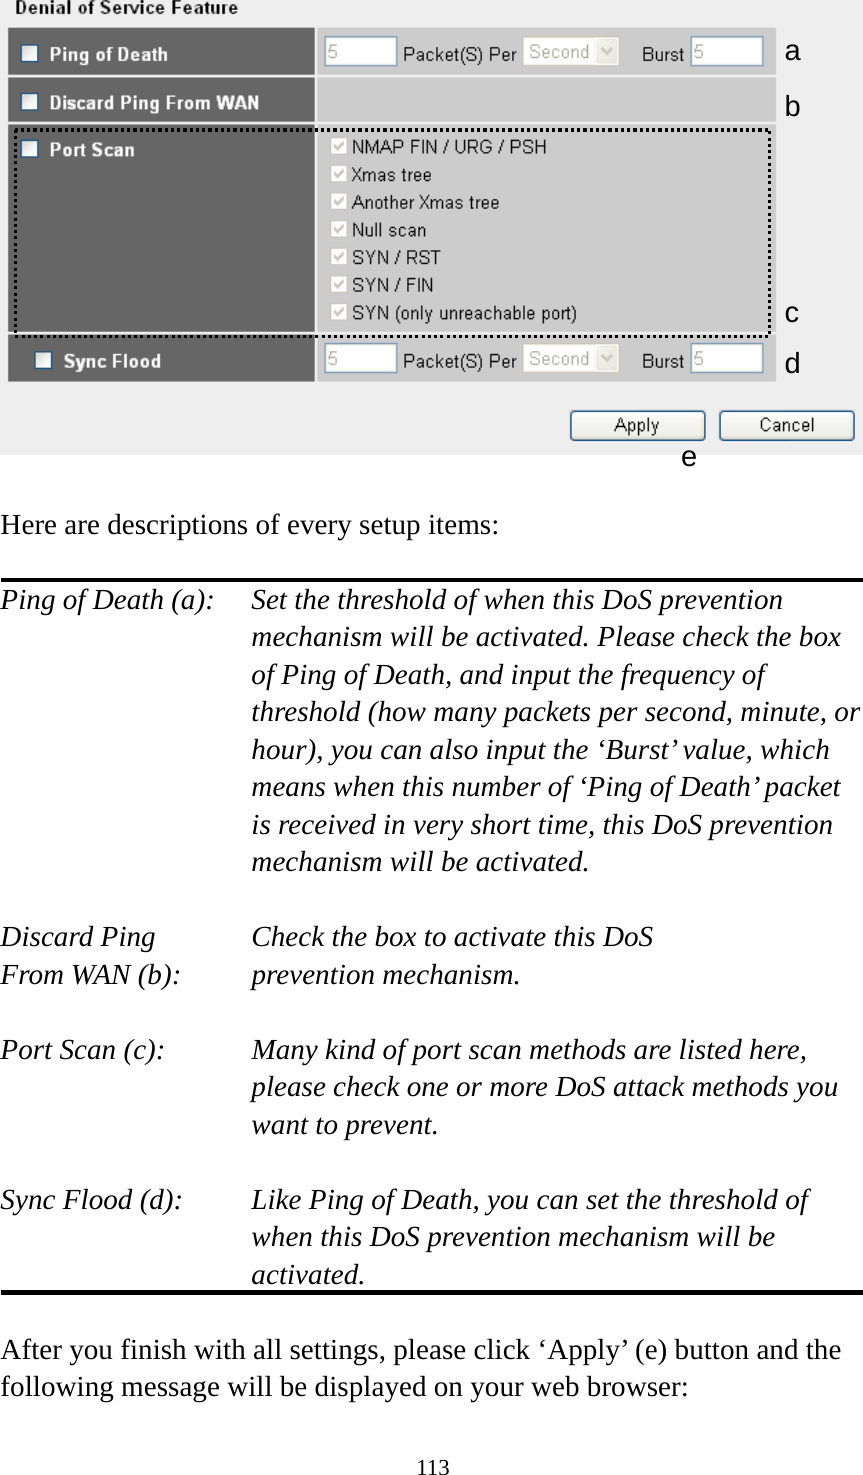 113   Here are descriptions of every setup items:  Ping of Death (a):    Set the threshold of when this DoS prevention mechanism will be activated. Please check the box of Ping of Death, and input the frequency of threshold (how many packets per second, minute, or hour), you can also input the ‘Burst’ value, which means when this number of ‘Ping of Death’ packet is received in very short time, this DoS prevention mechanism will be activated.  Discard Ping      Check the box to activate this DoS From WAN (b):     prevention mechanism.  Port Scan (c):    Many kind of port scan methods are listed here, please check one or more DoS attack methods you want to prevent.  Sync Flood (d):    Like Ping of Death, you can set the threshold of when this DoS prevention mechanism will be activated.  After you finish with all settings, please click ‘Apply’ (e) button and the following message will be displayed on your web browser: a b c d e 